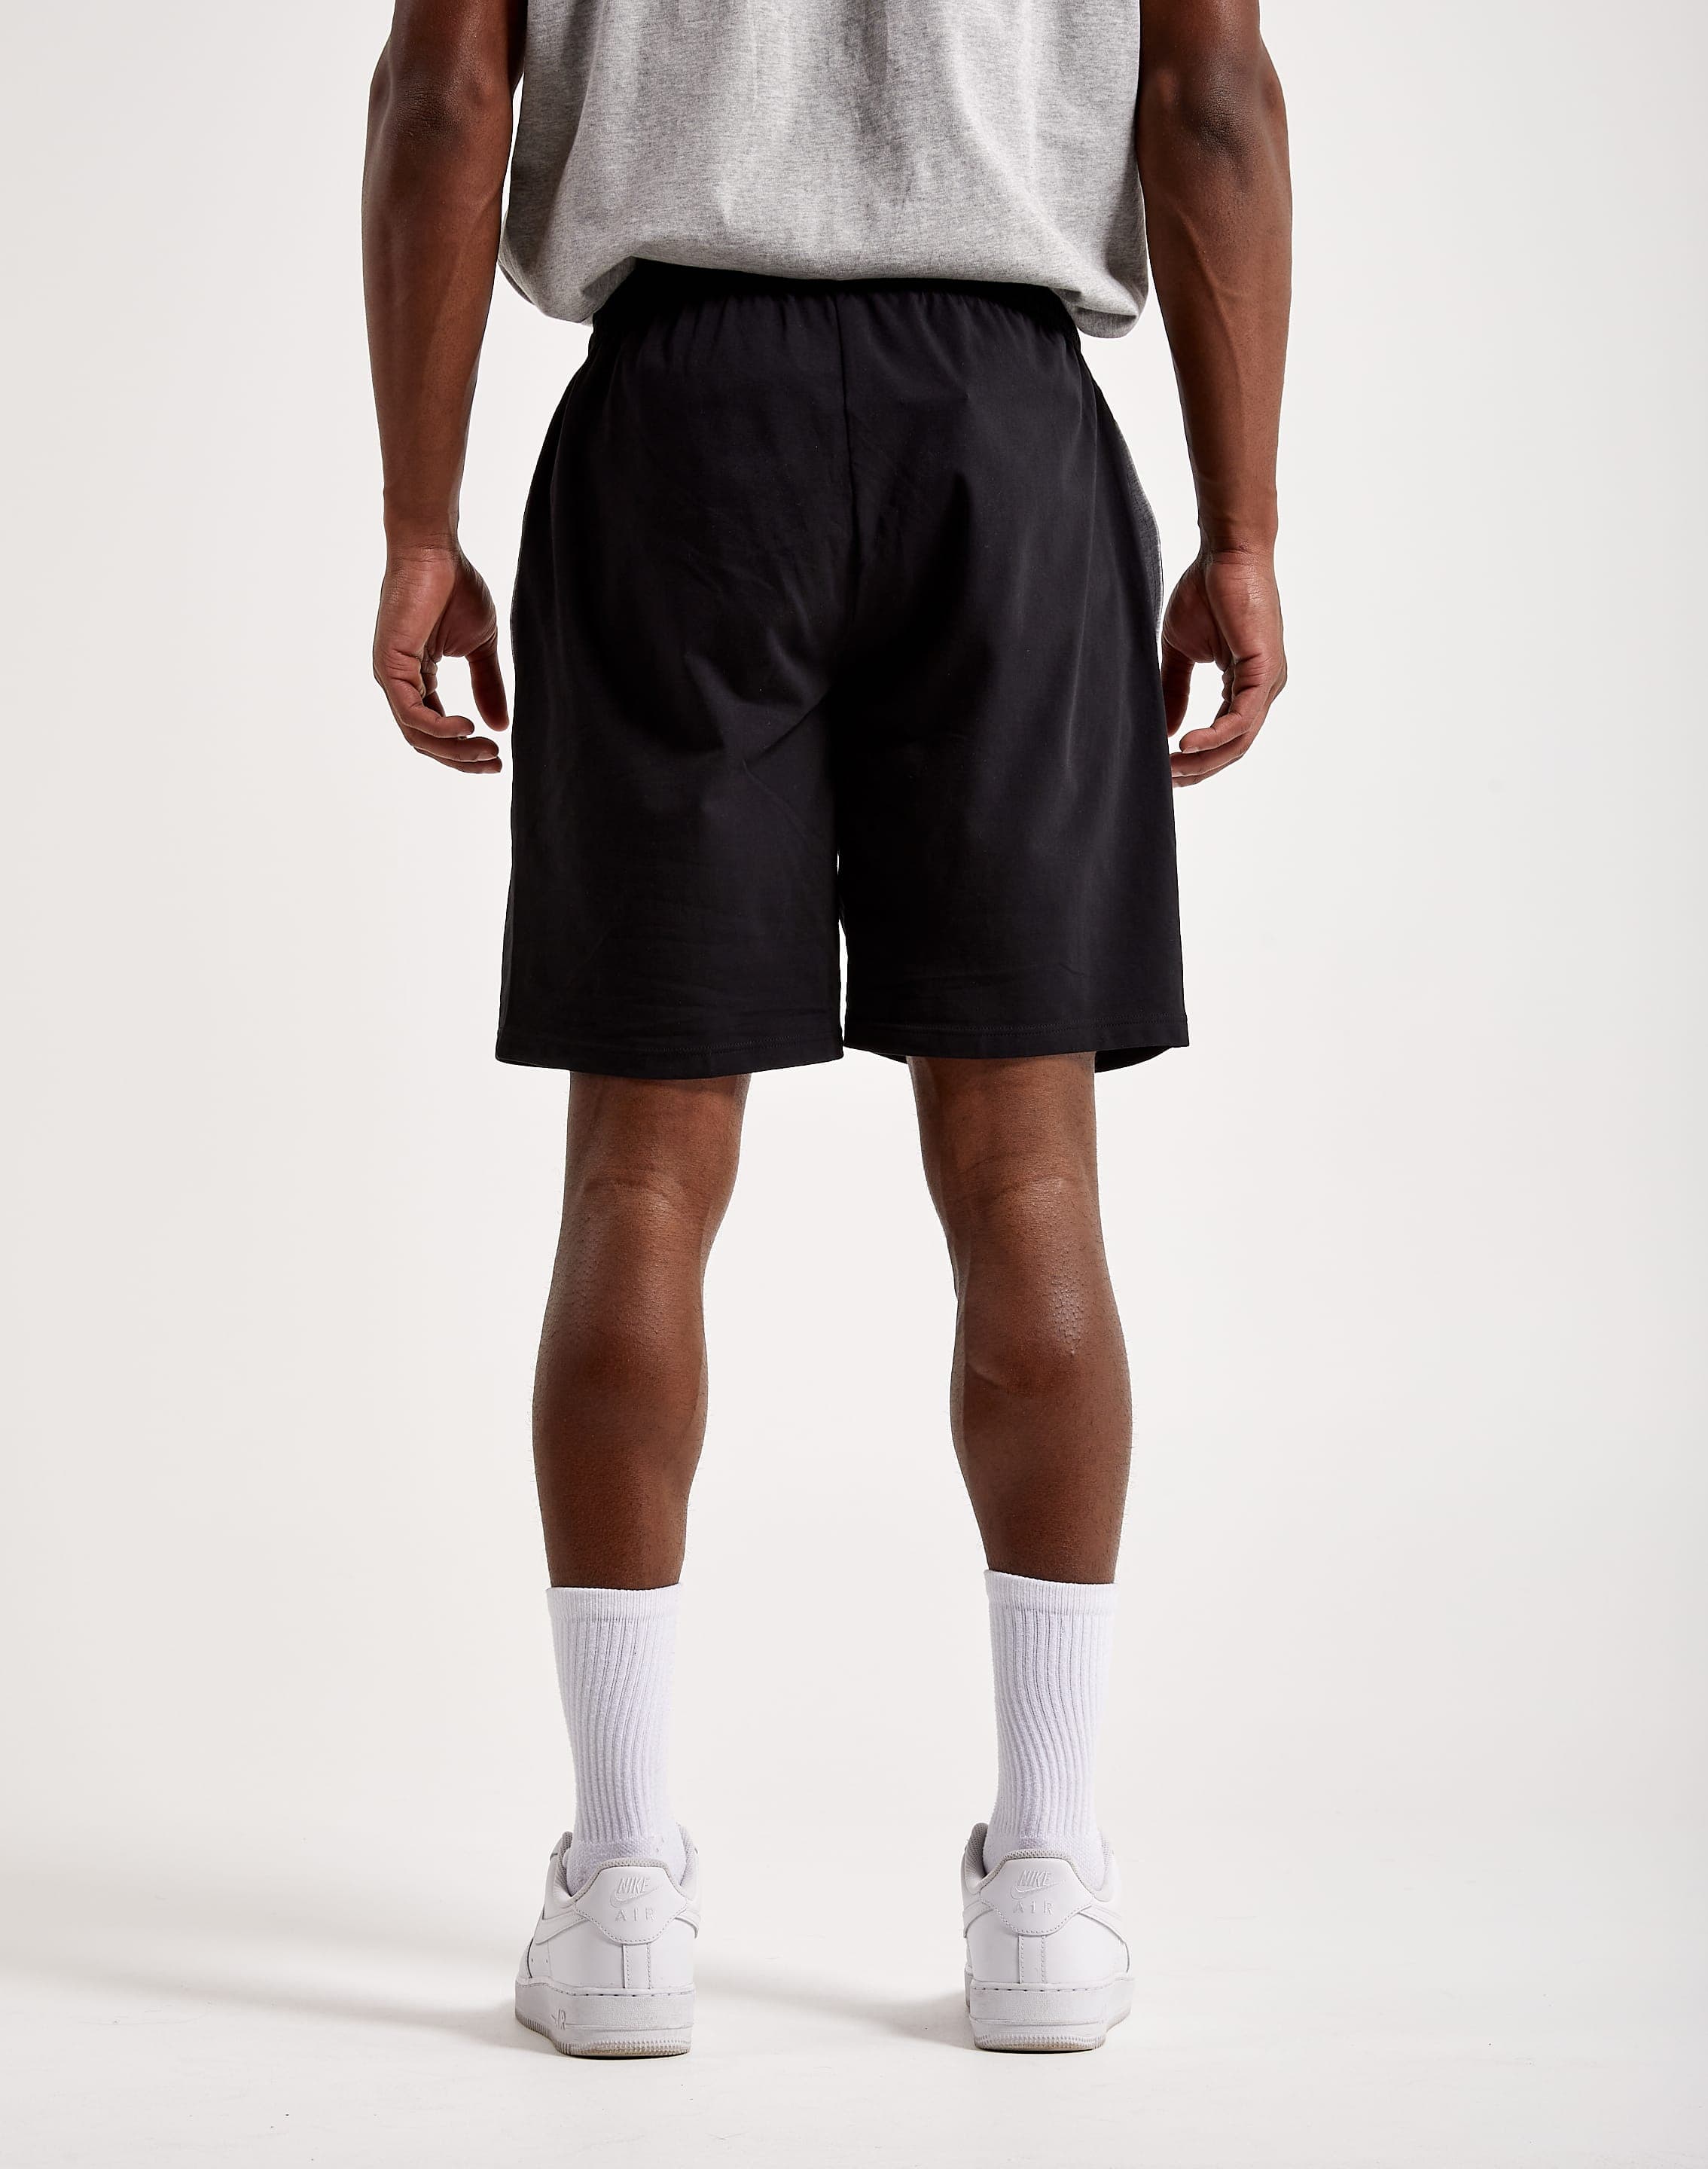 Hugo Boss Mix And Match Shorts#N#– DTLR